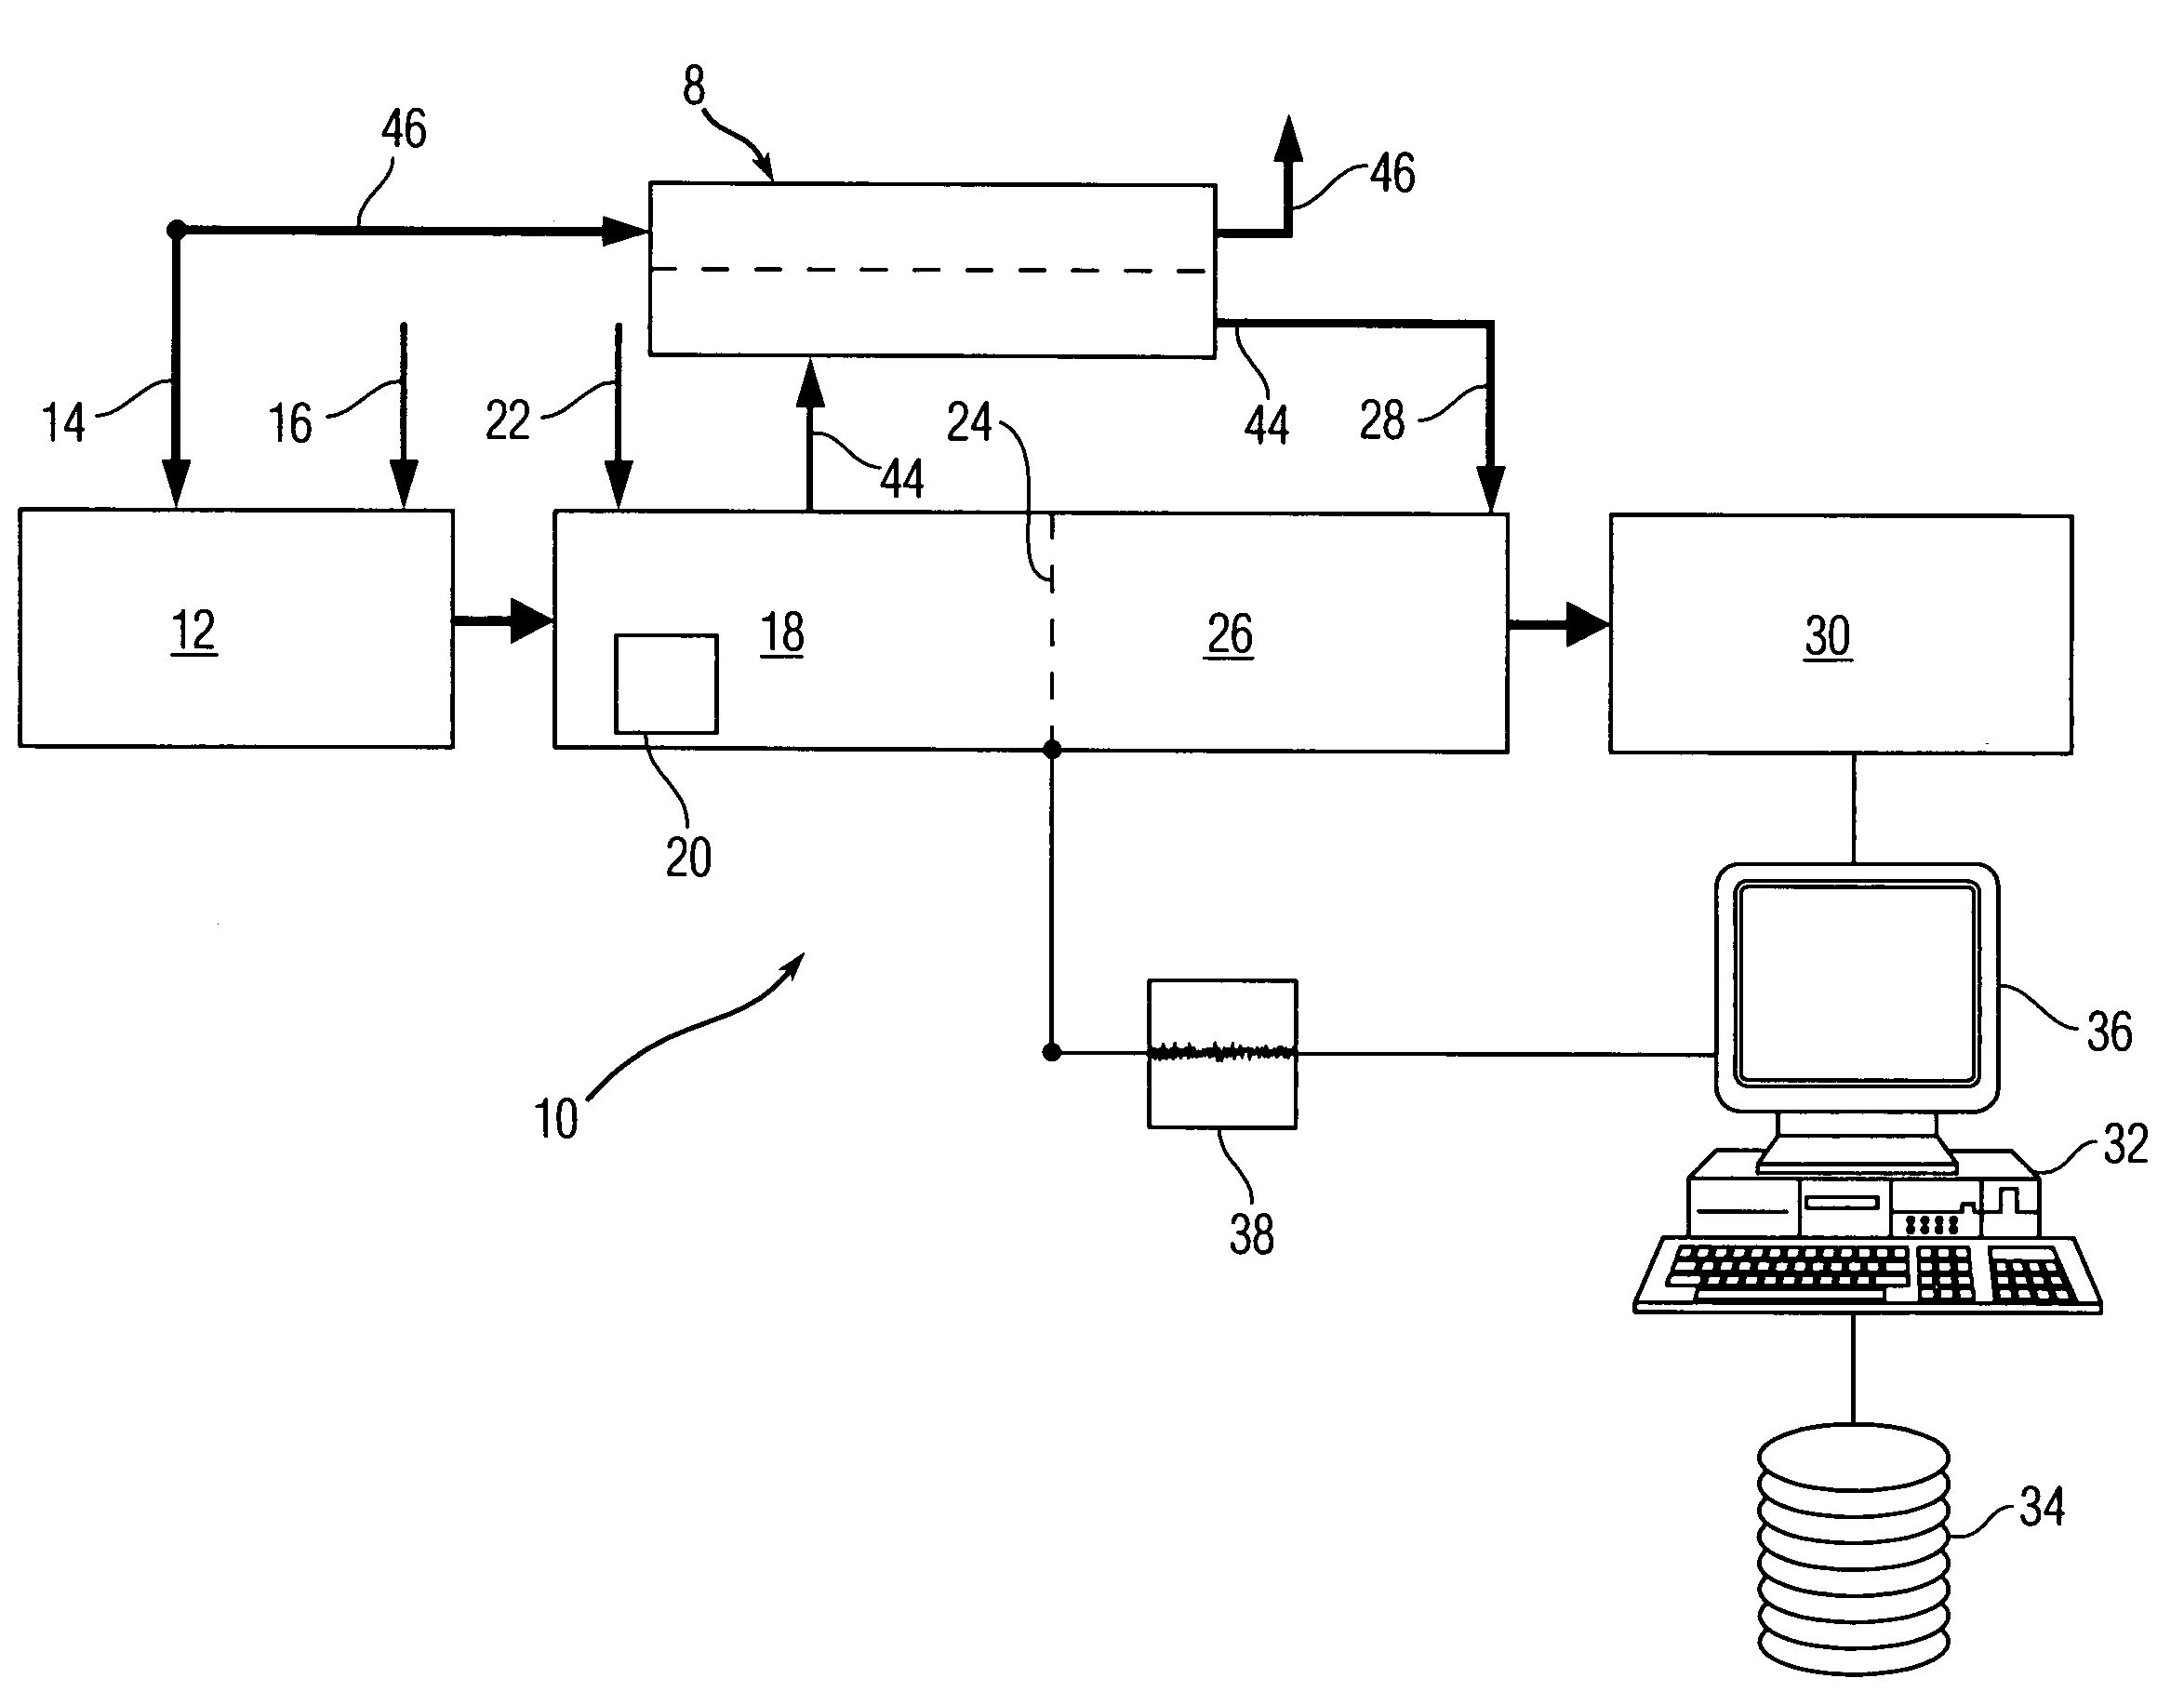 Apparatus and method for water vapor removal in an ion mobility spectrometer